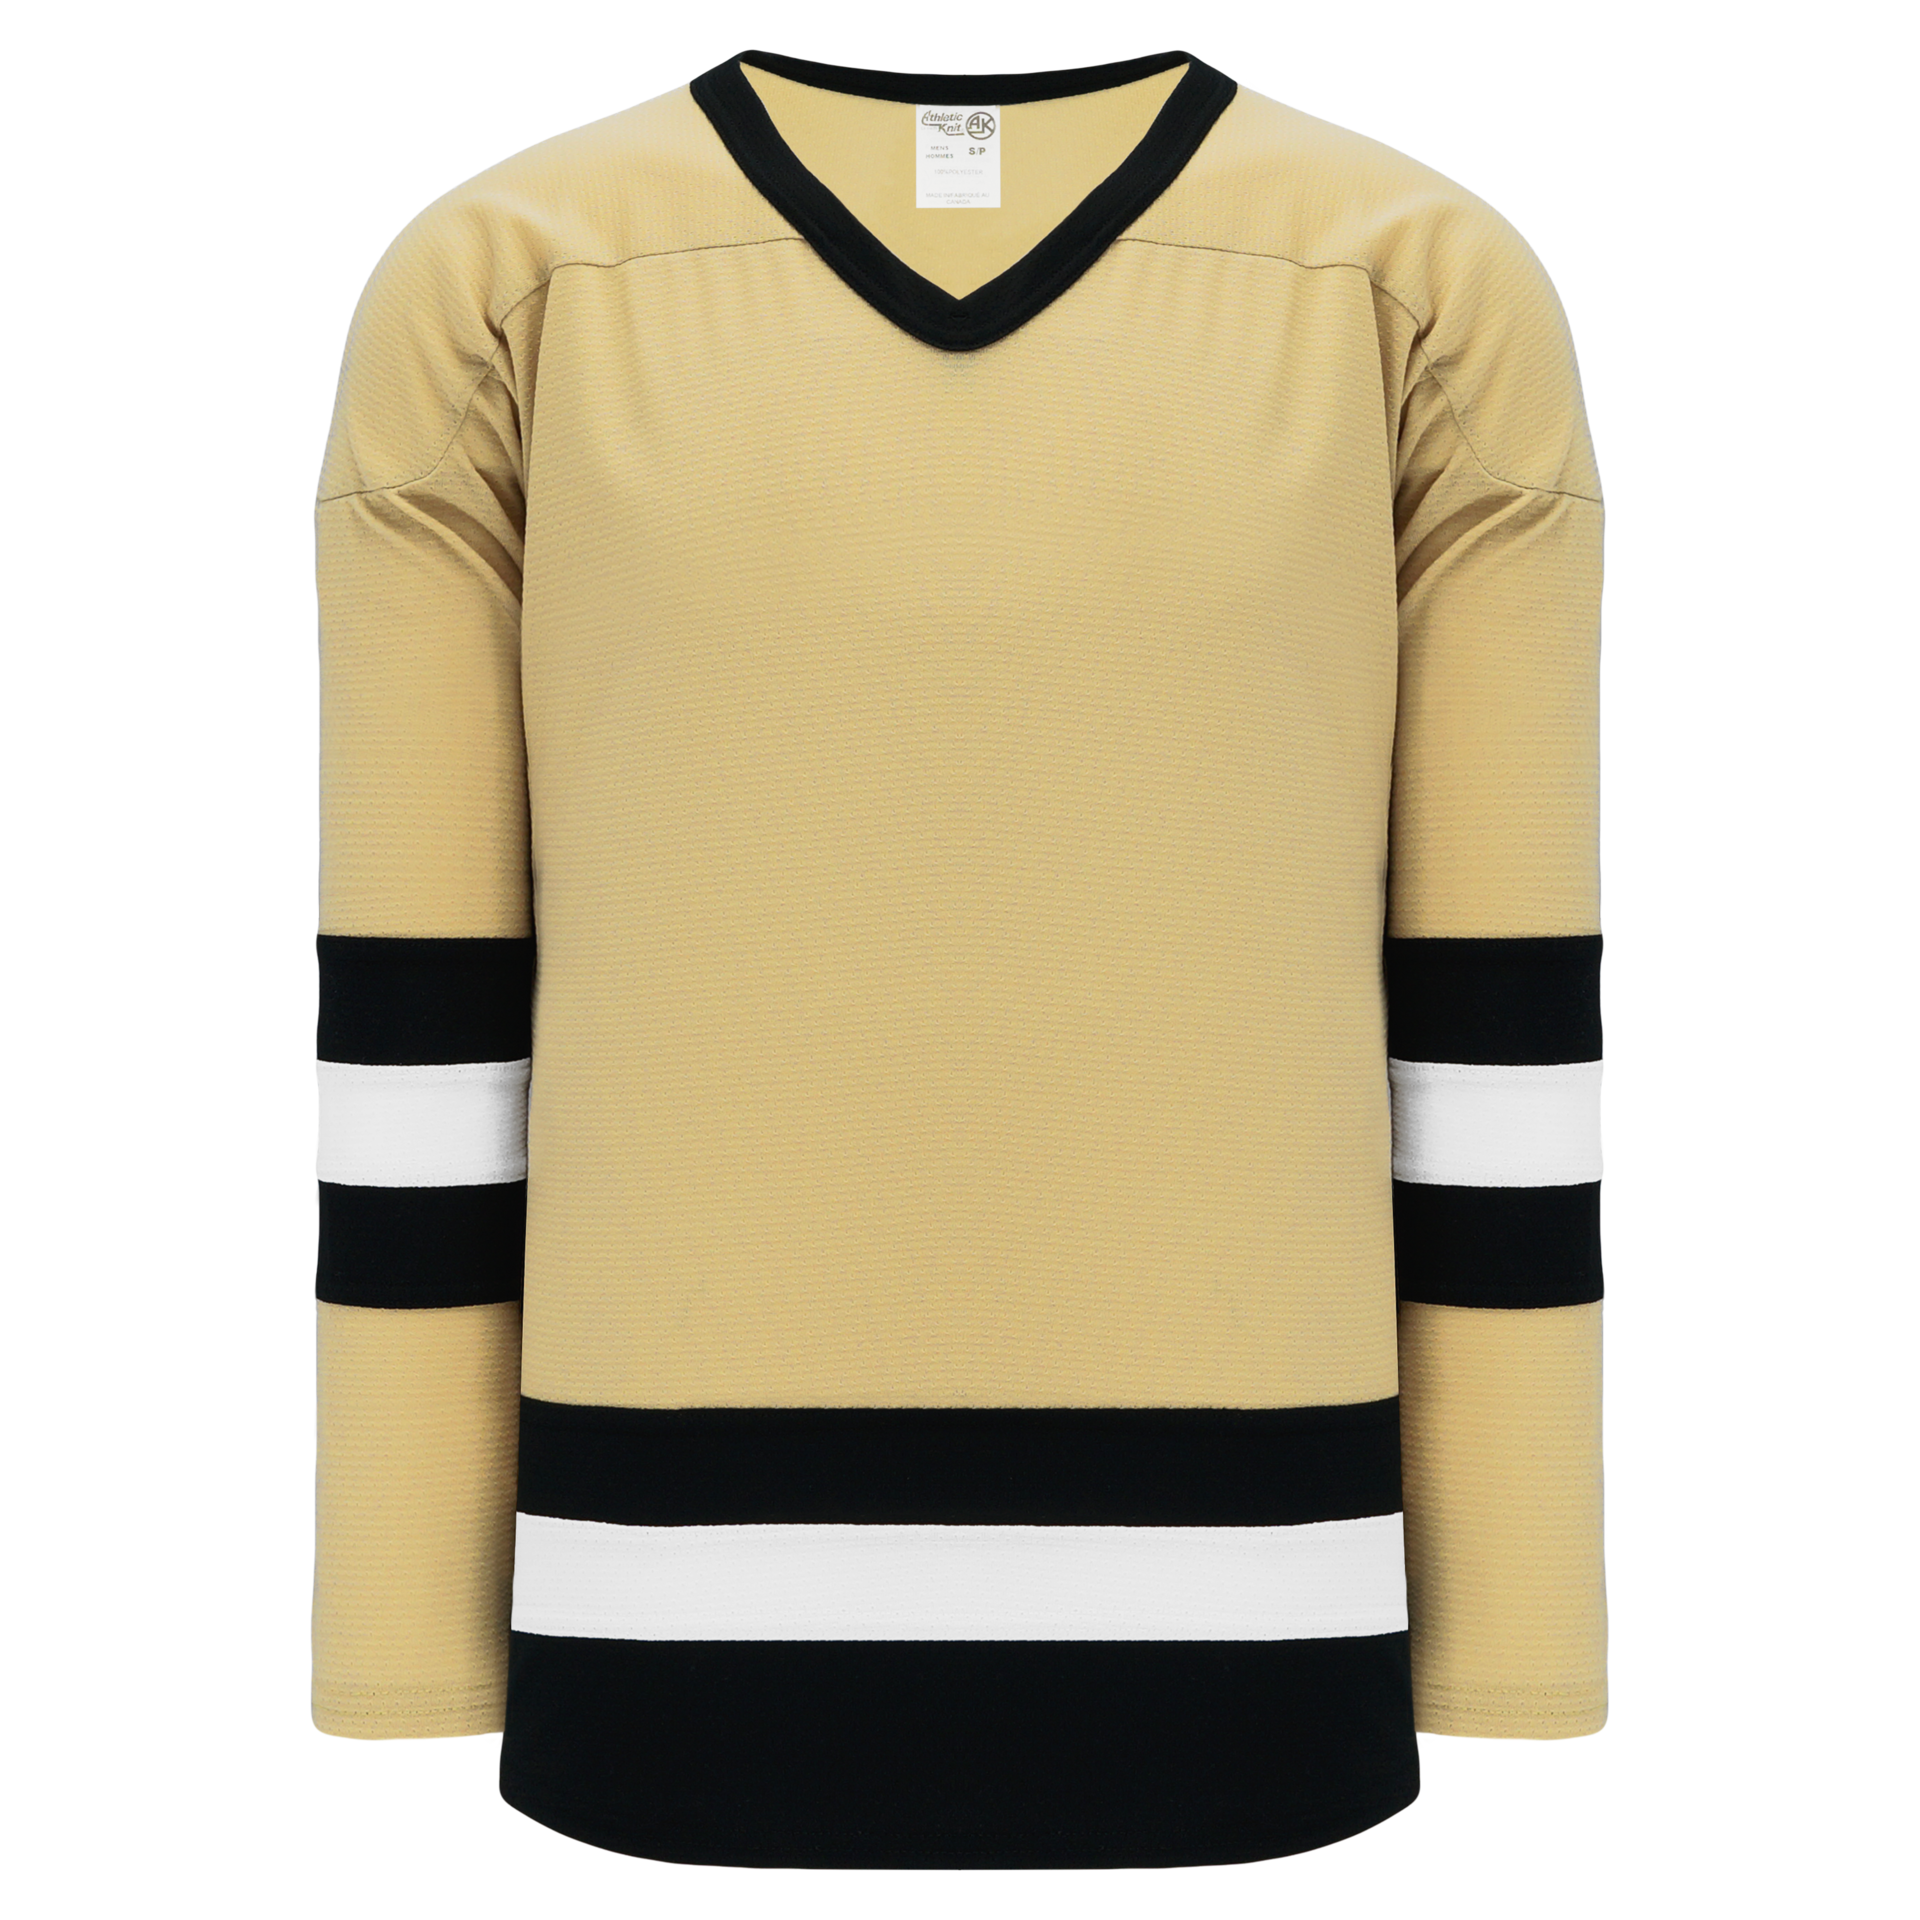 Athletic Knit Select Series Hockey Jersey, Sizes 2xl-4xl | Hockey | Select Series | Jerseys 426 AV Red/Black/White / 2XL